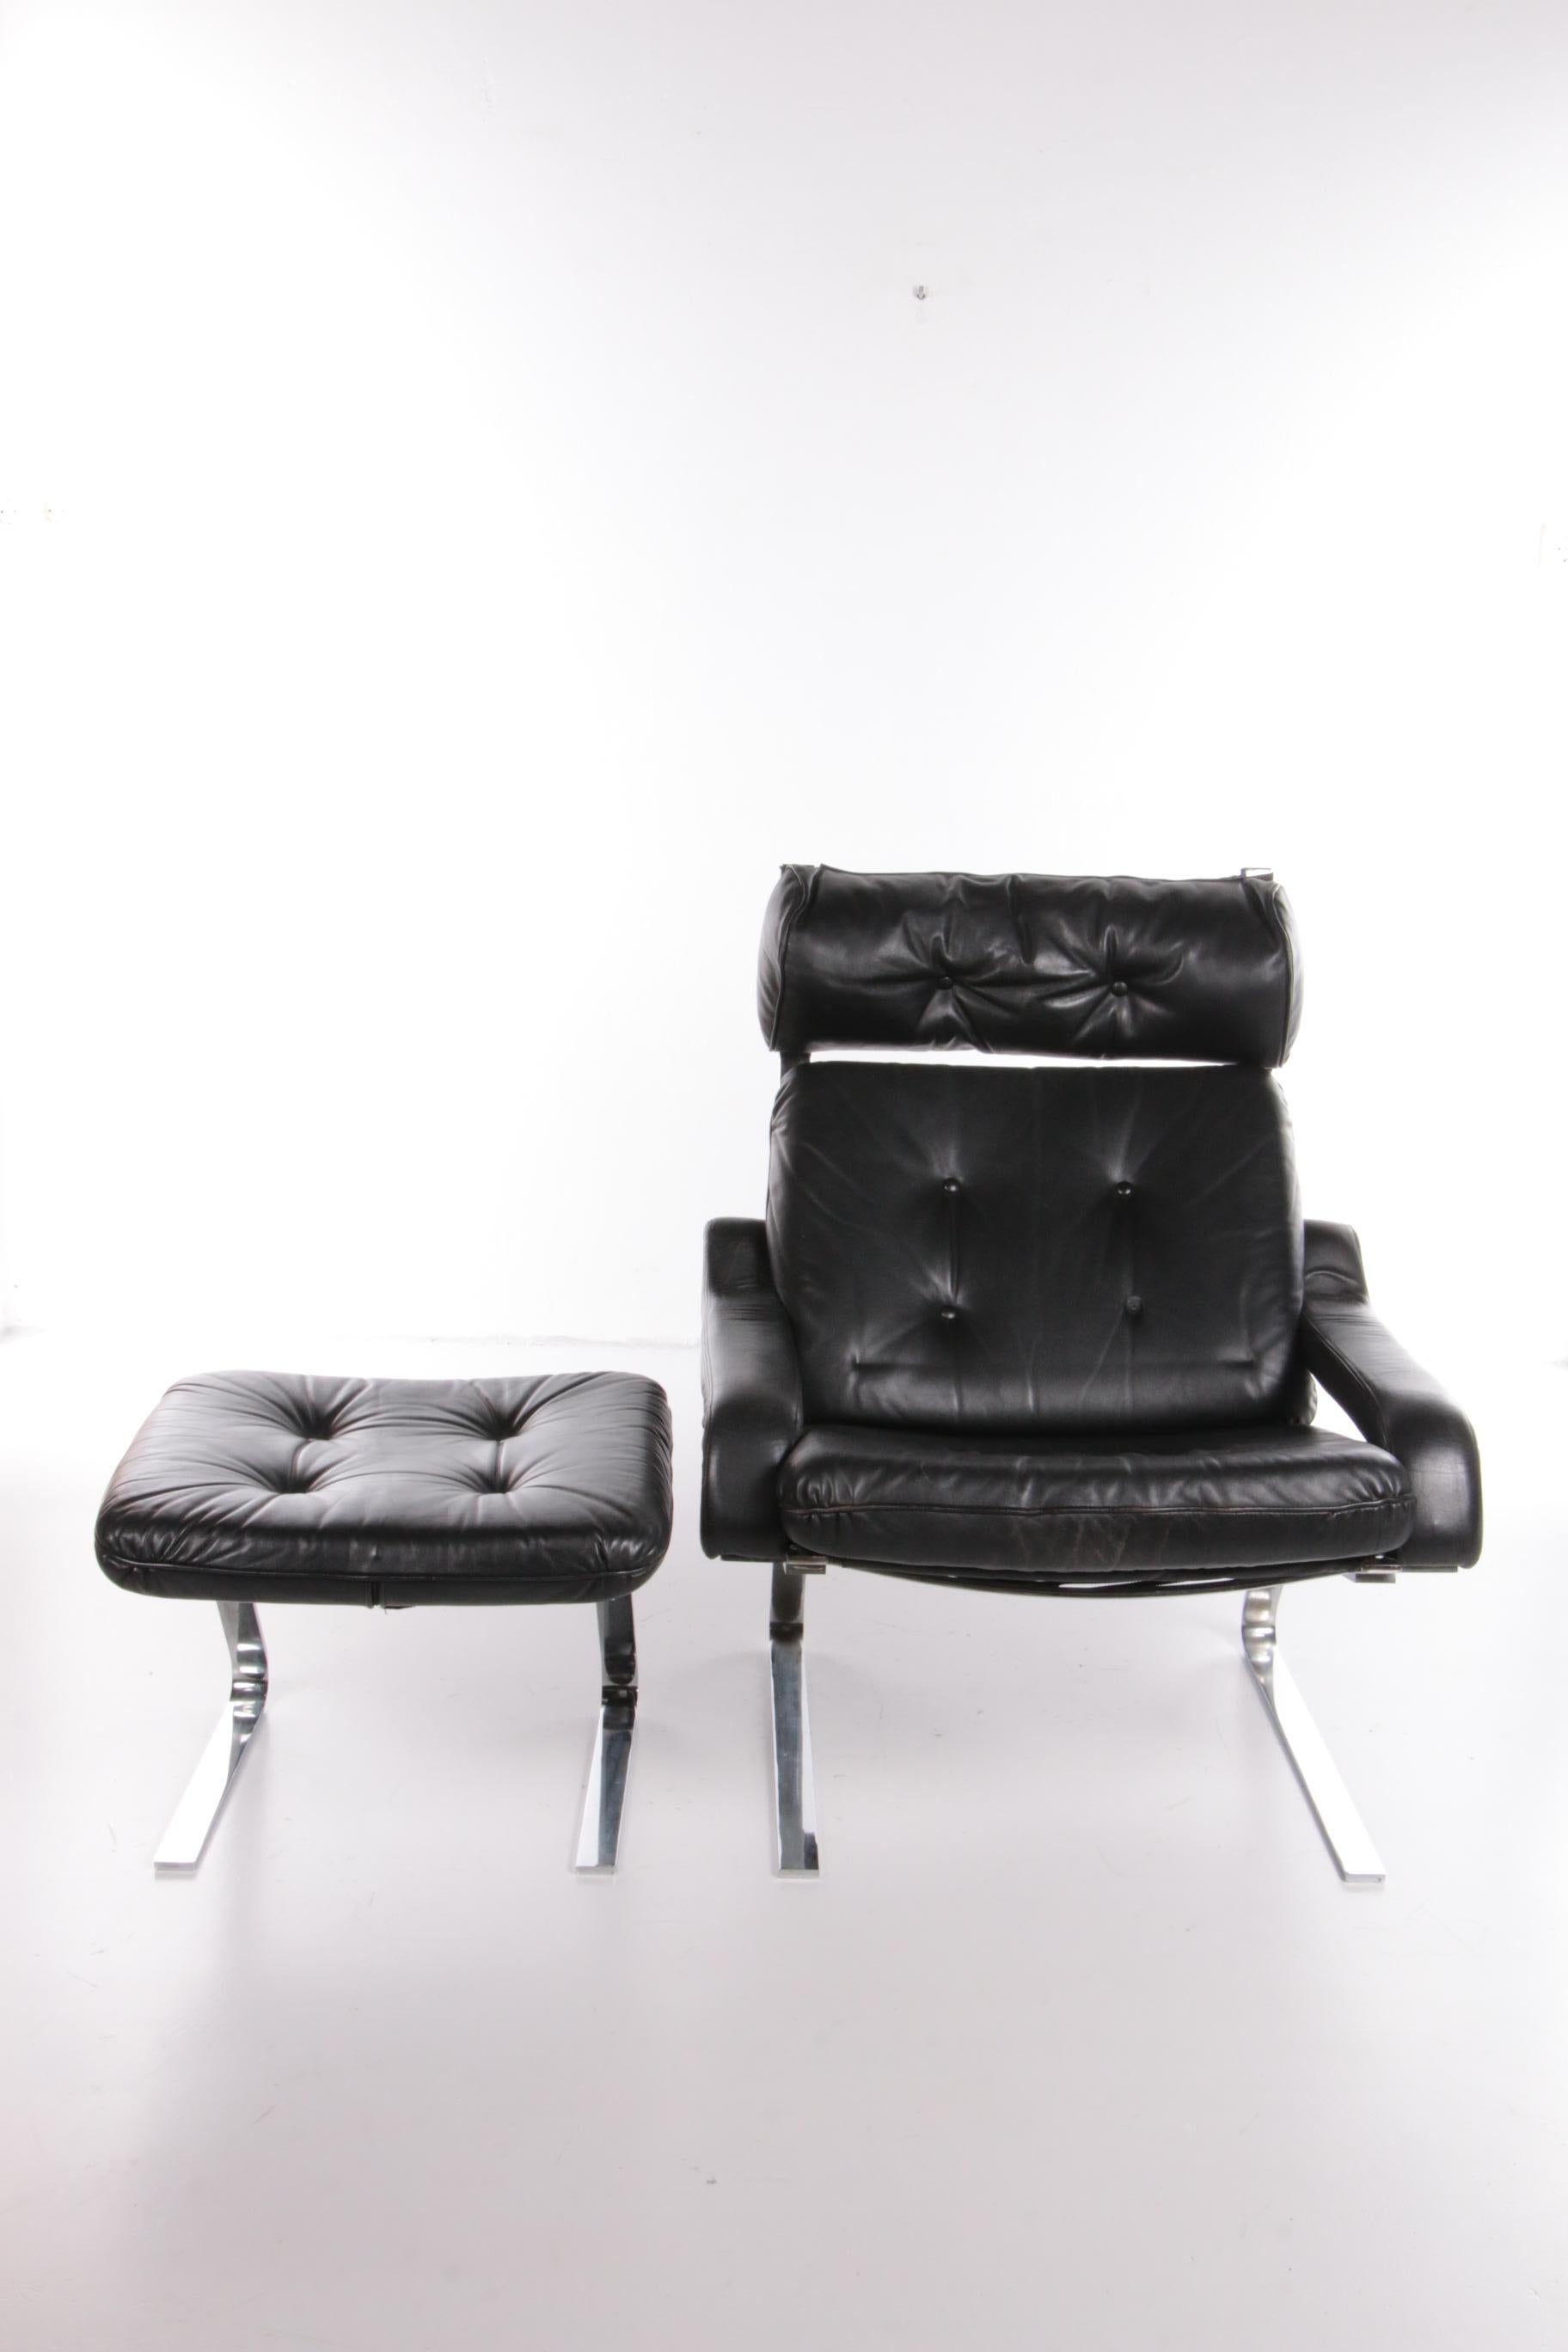 This armchair with ottoman was designed by Reinhold Adolf and produced by COR in the 1960s.

The frame is made of flat steel. The seat and back are made of patinated leather in a beautiful black color. The frame works like a spring, making the